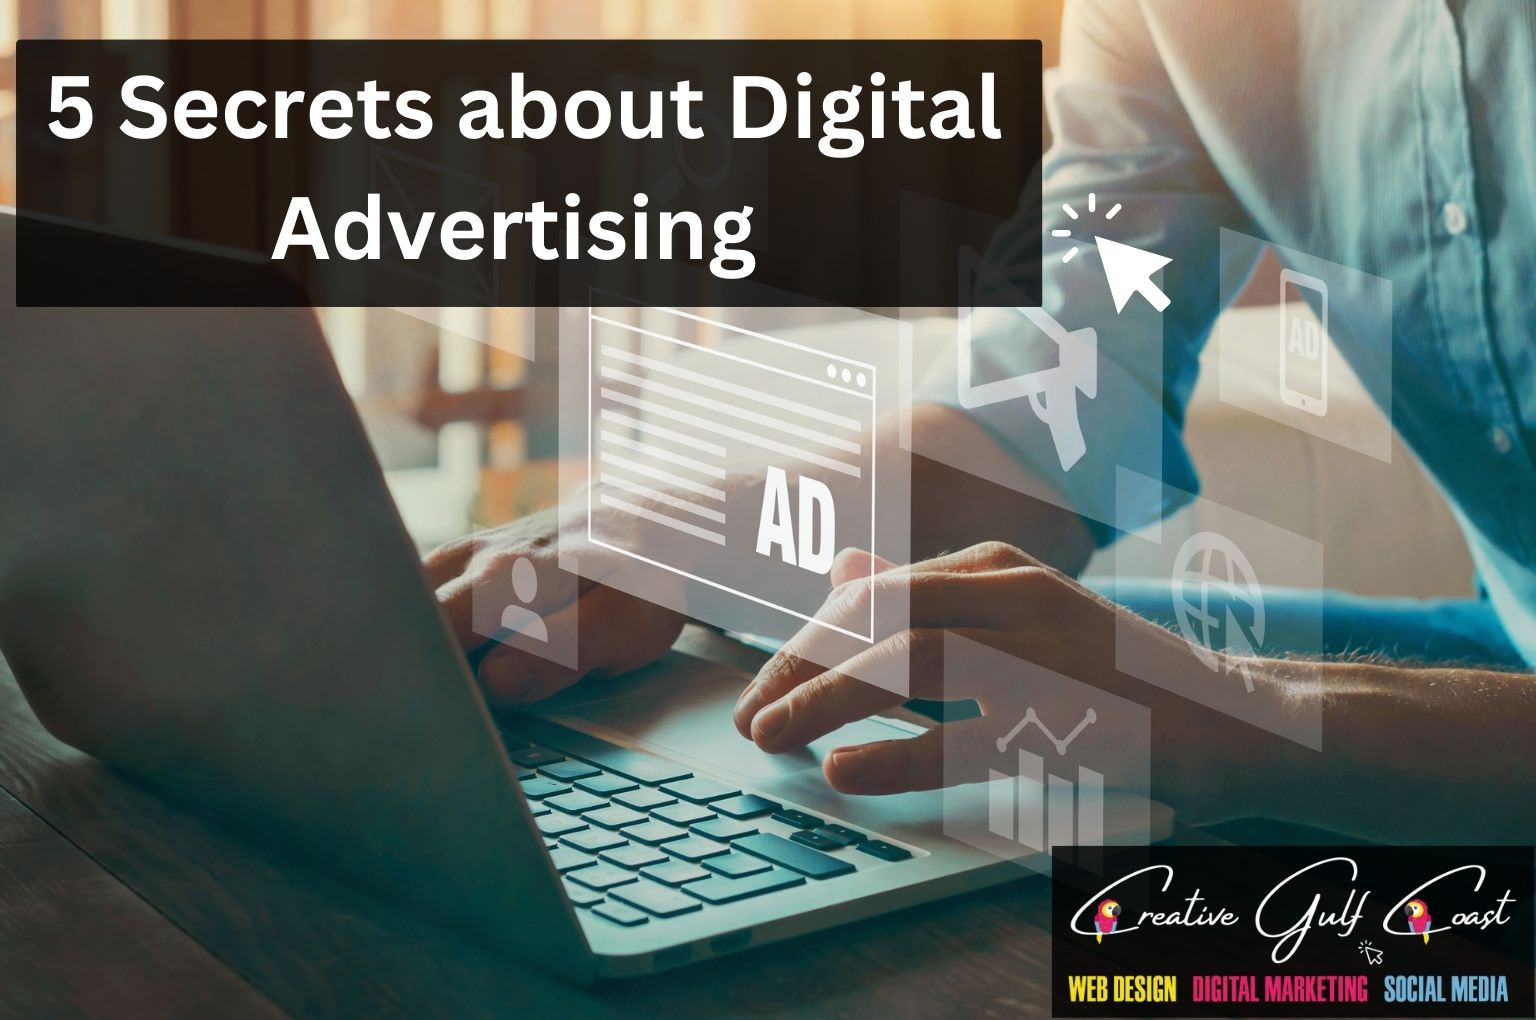 5 secrets about digital advertising - tips and hints from the pros. Creative Gulf Coast Digital Marketing Agency in Tampa Bay Area